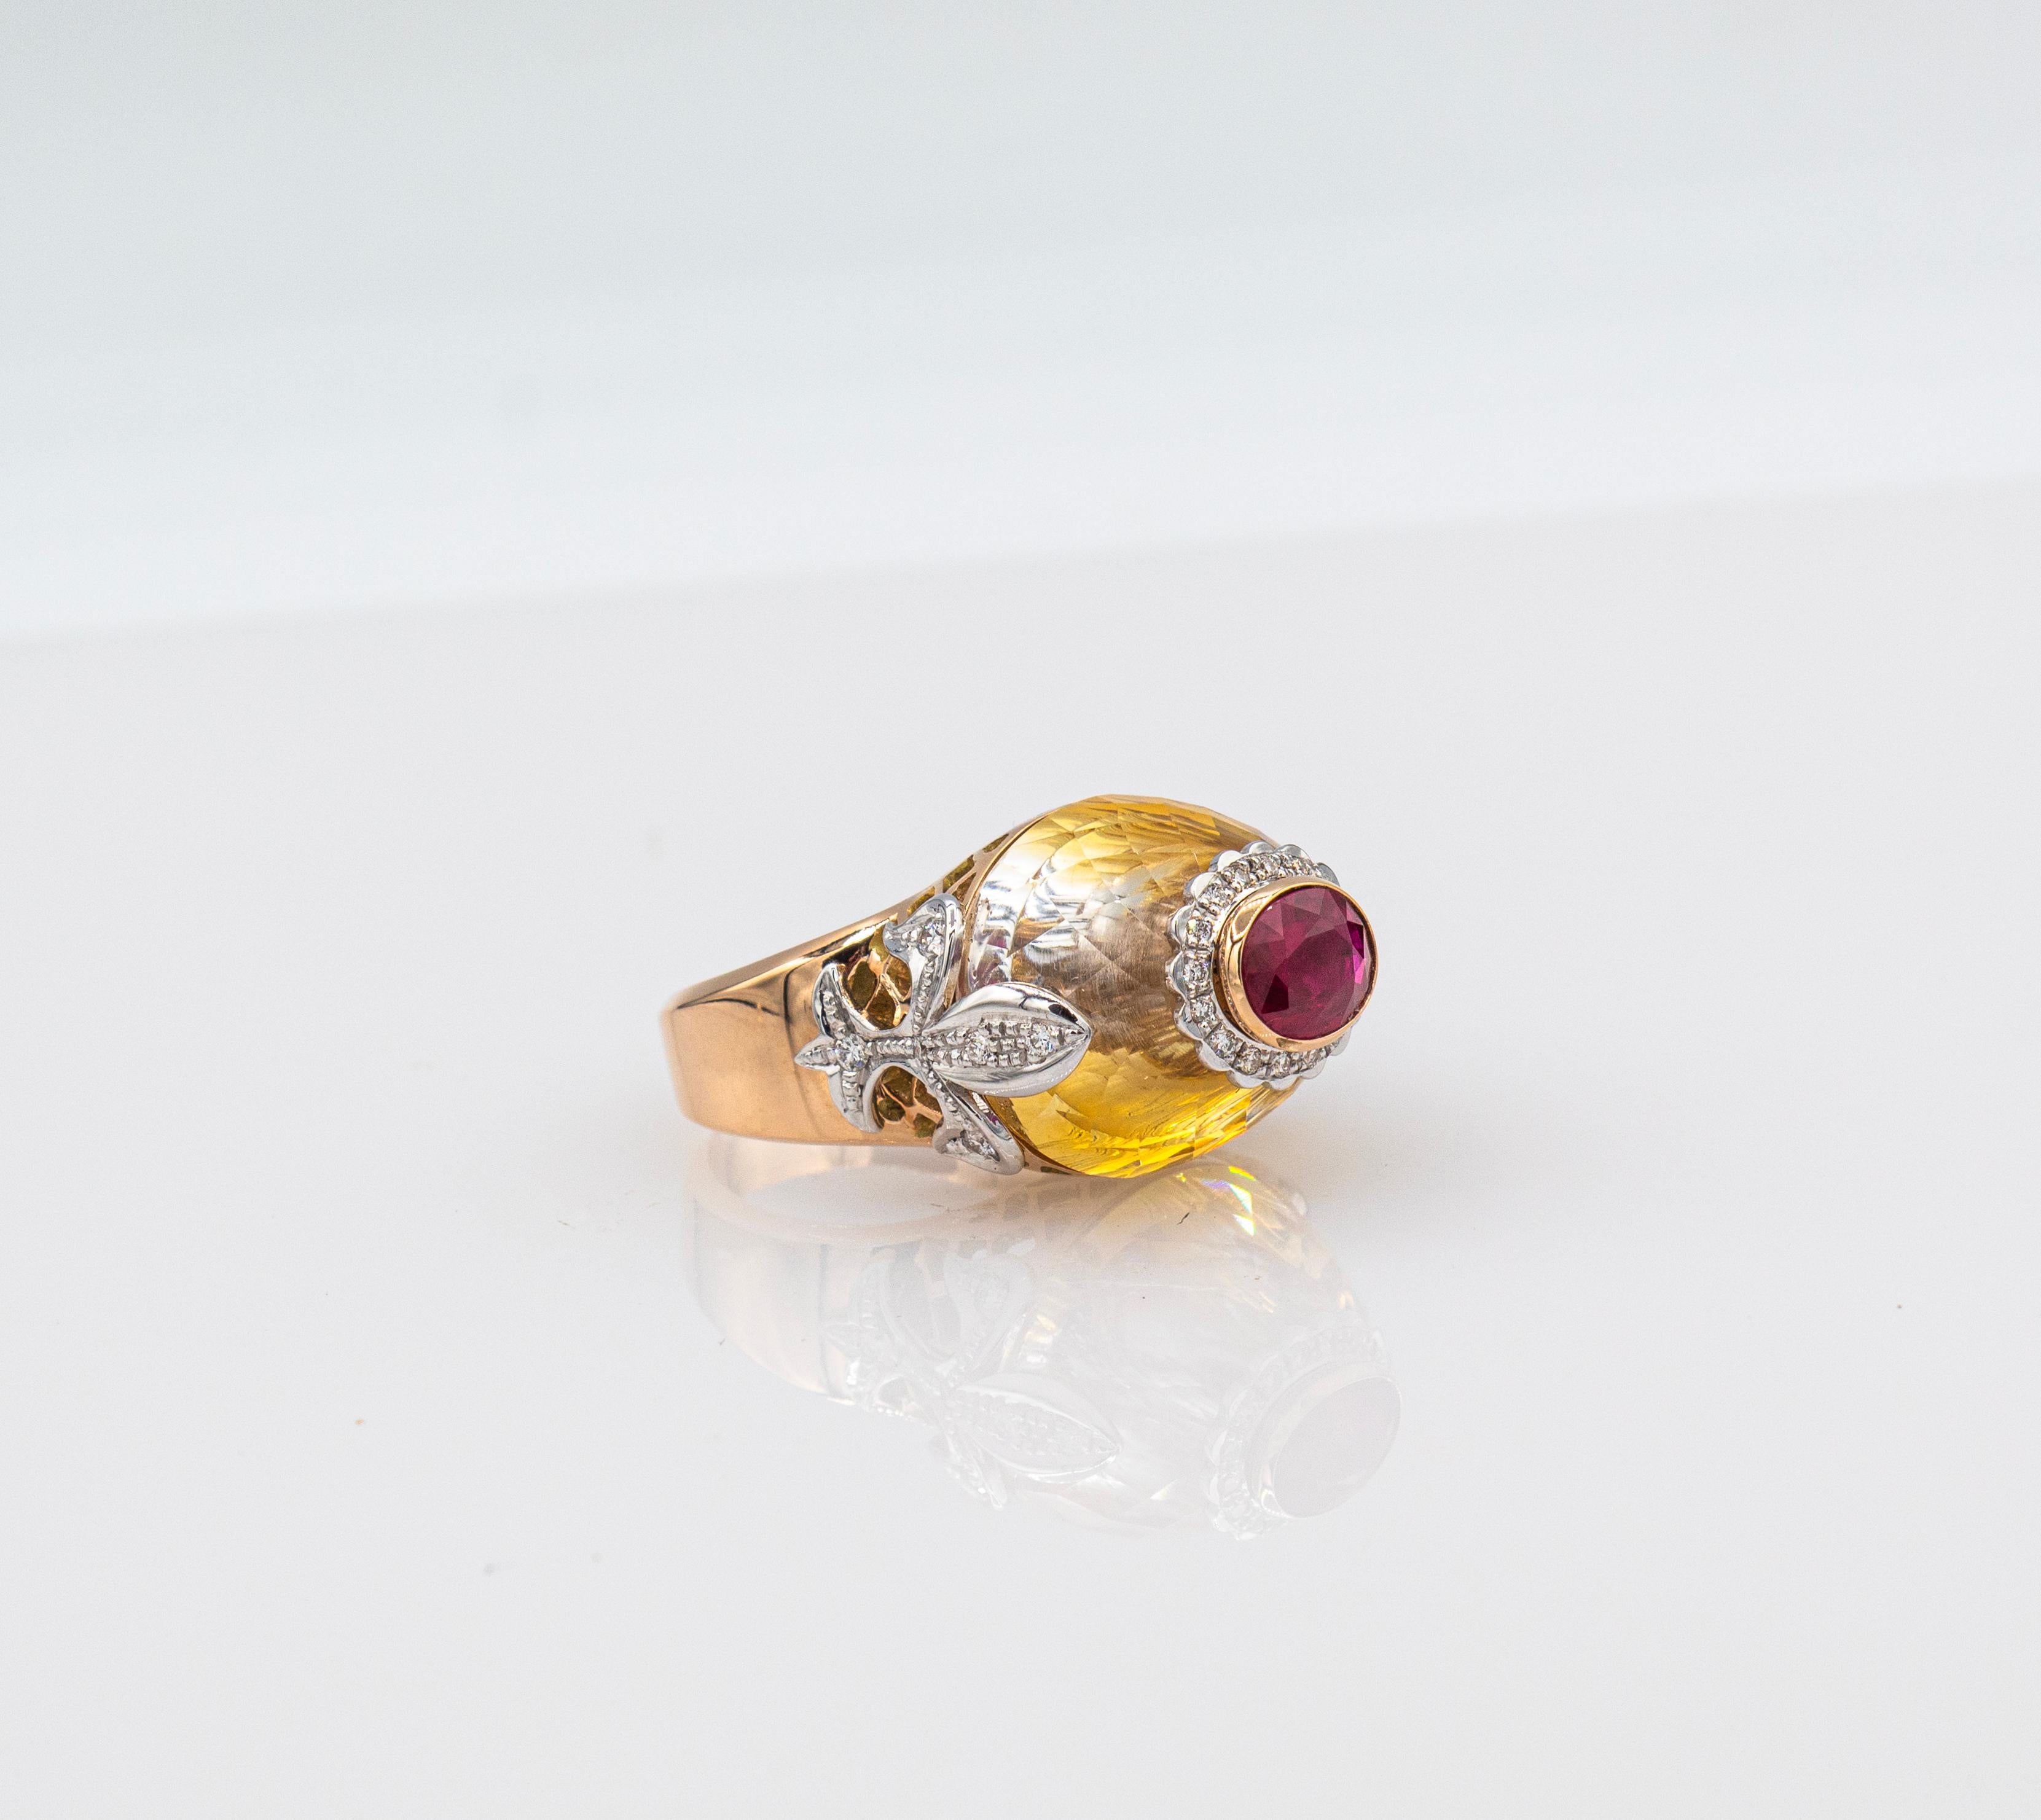 Art Deco Style White Diamond Oval Cut Ruby Citrine Rosé Gold Cocktail Ring For Sale 6